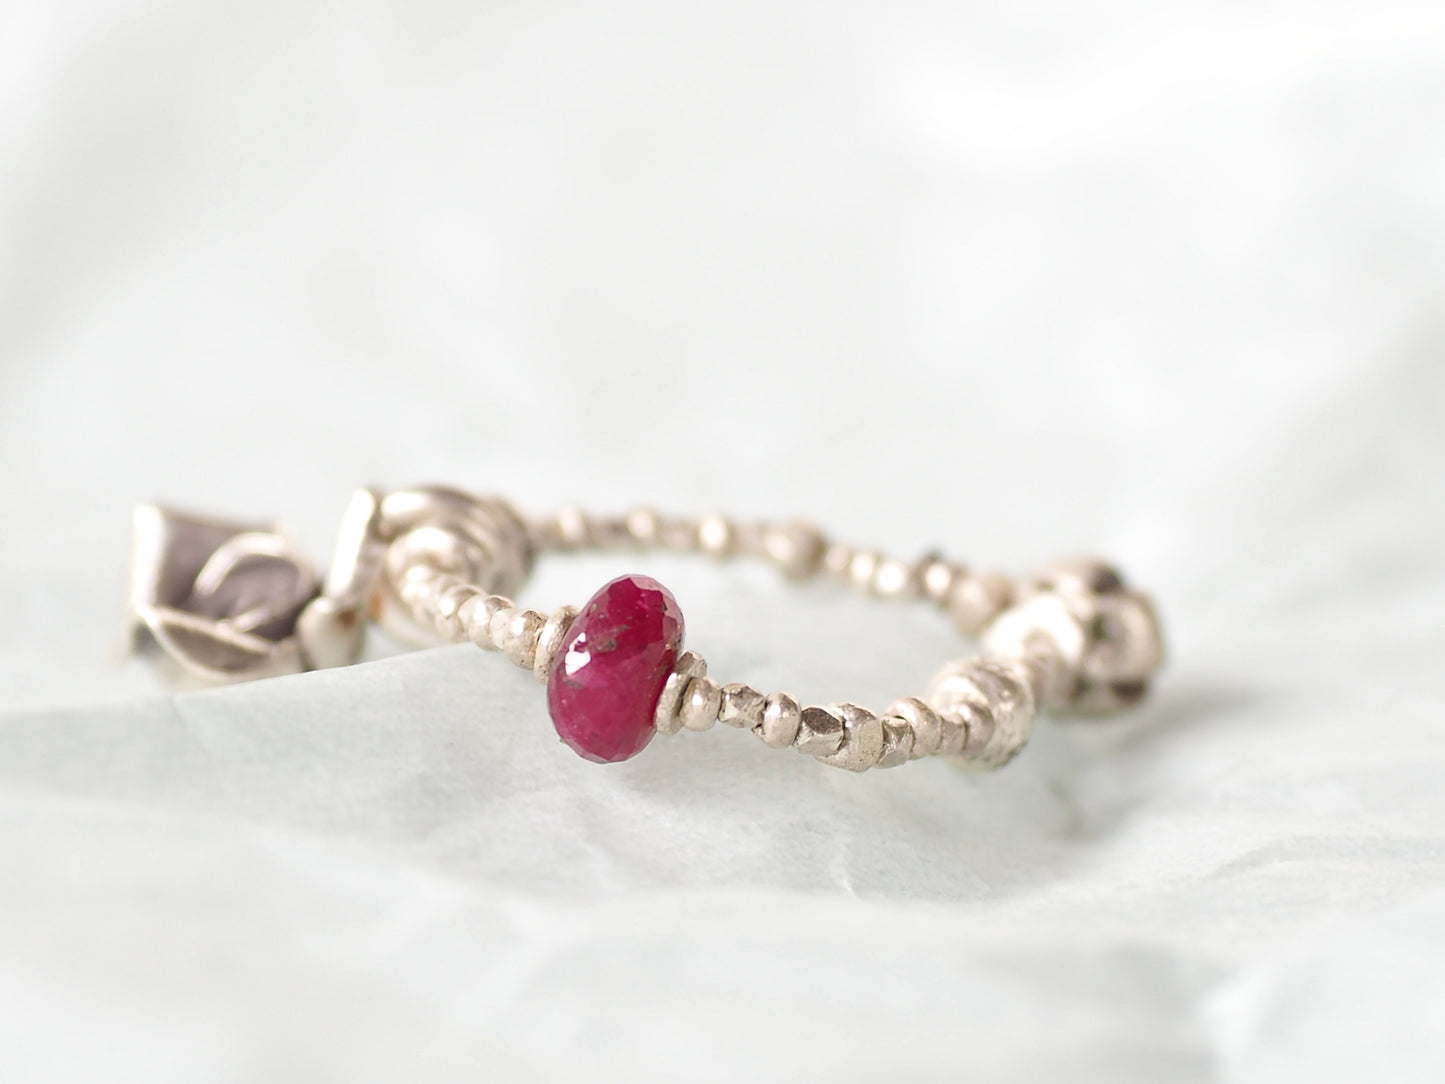 -flower charm・Ruby- silver beads-ring